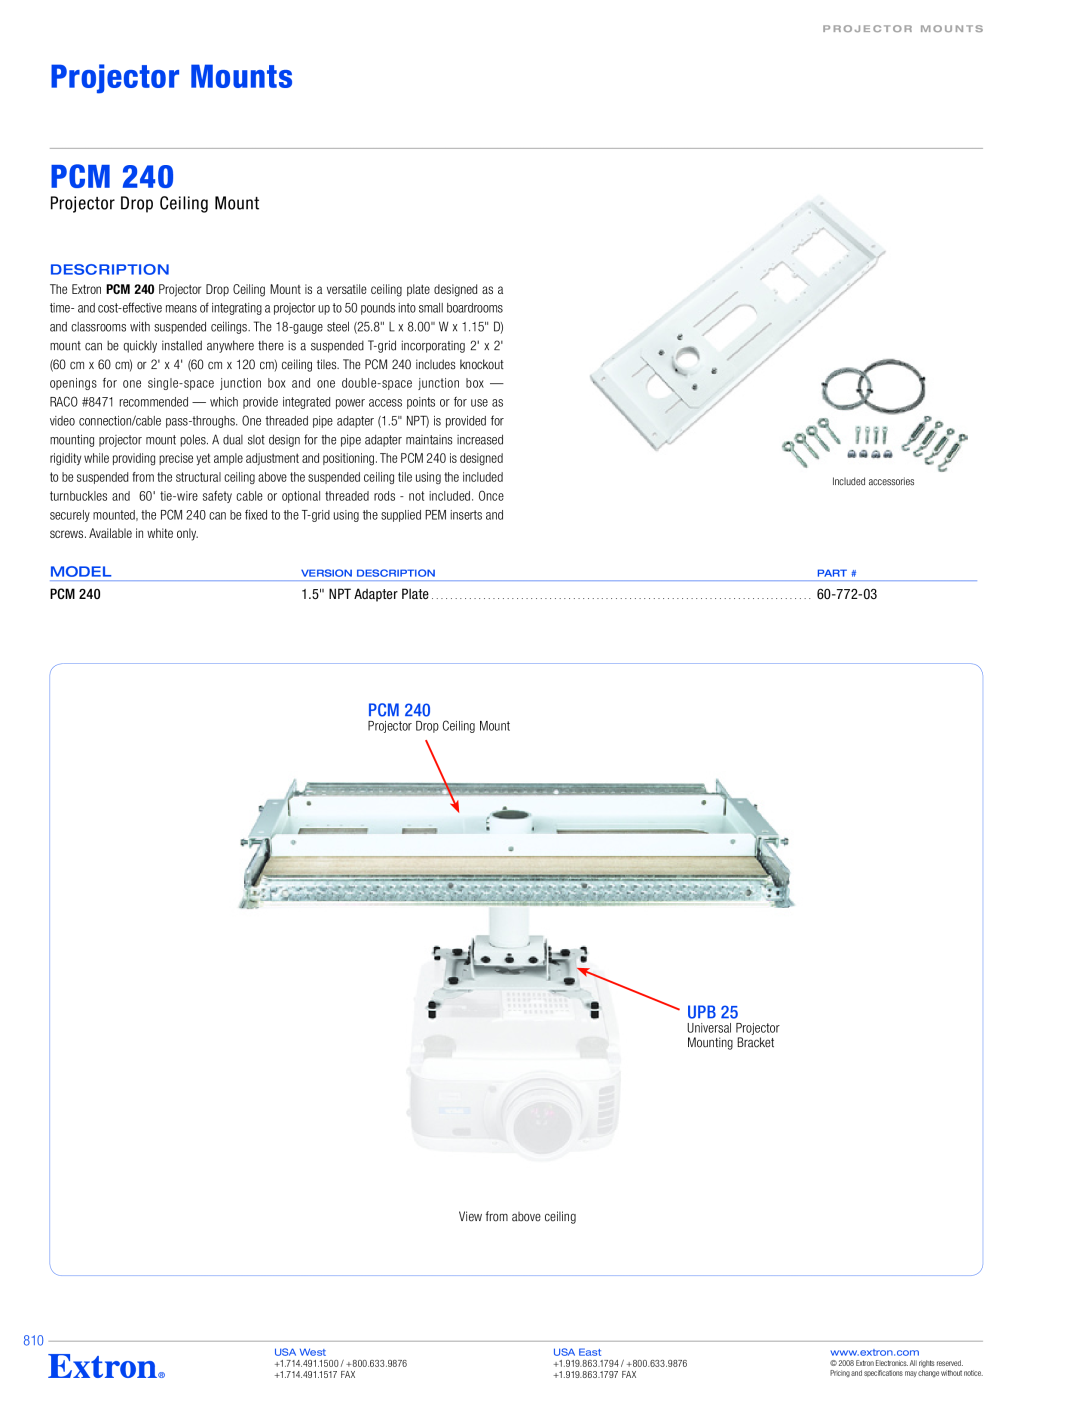 Extron electronic PCM 240 manual Projector Ceiling Mount, User’s Guide, 68-1180-01, Extron Electronics, USA, Rev. C 